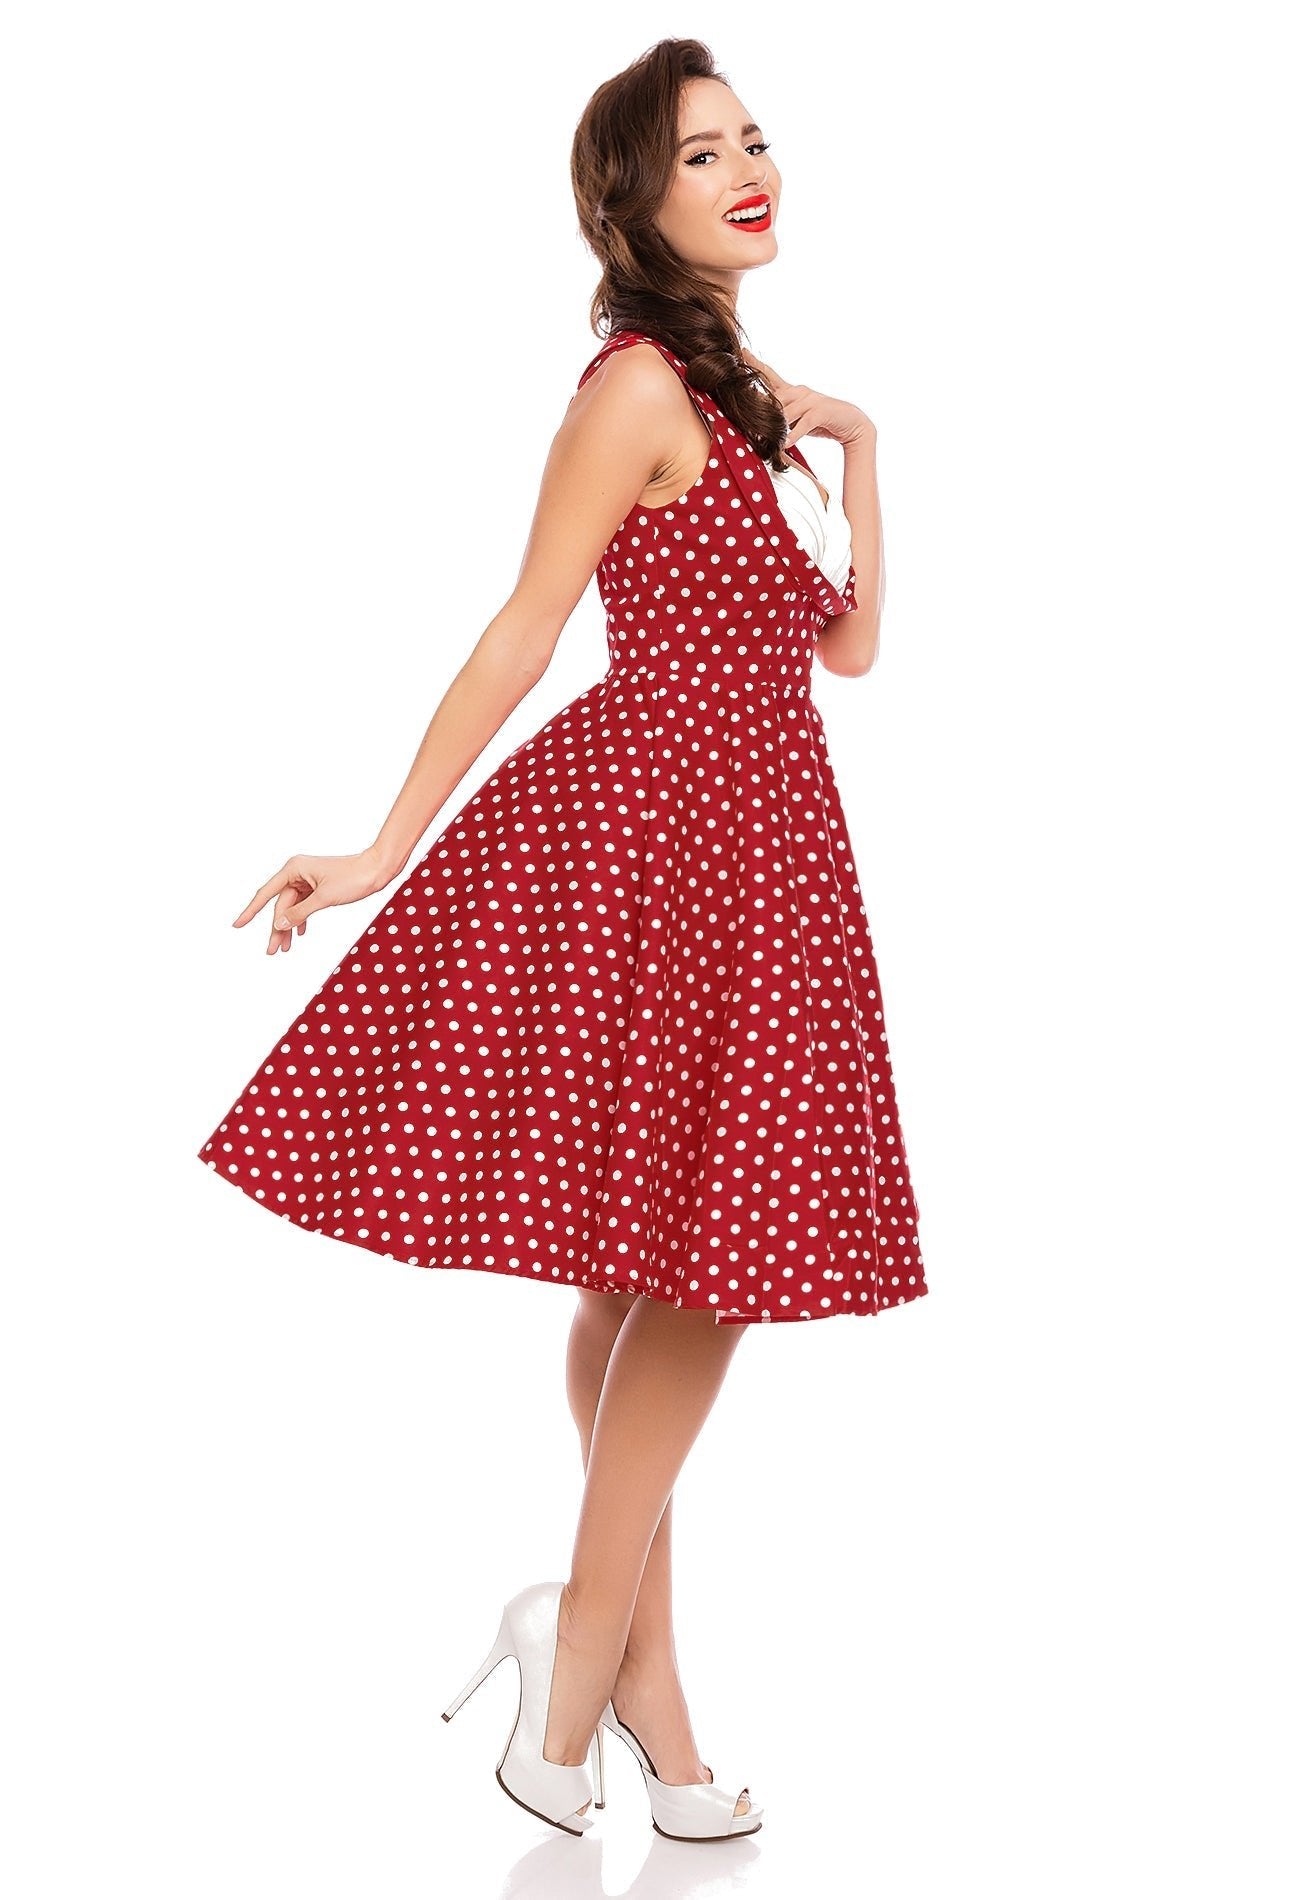 Pleated 50s Style Swing Dress Red Polka Dots